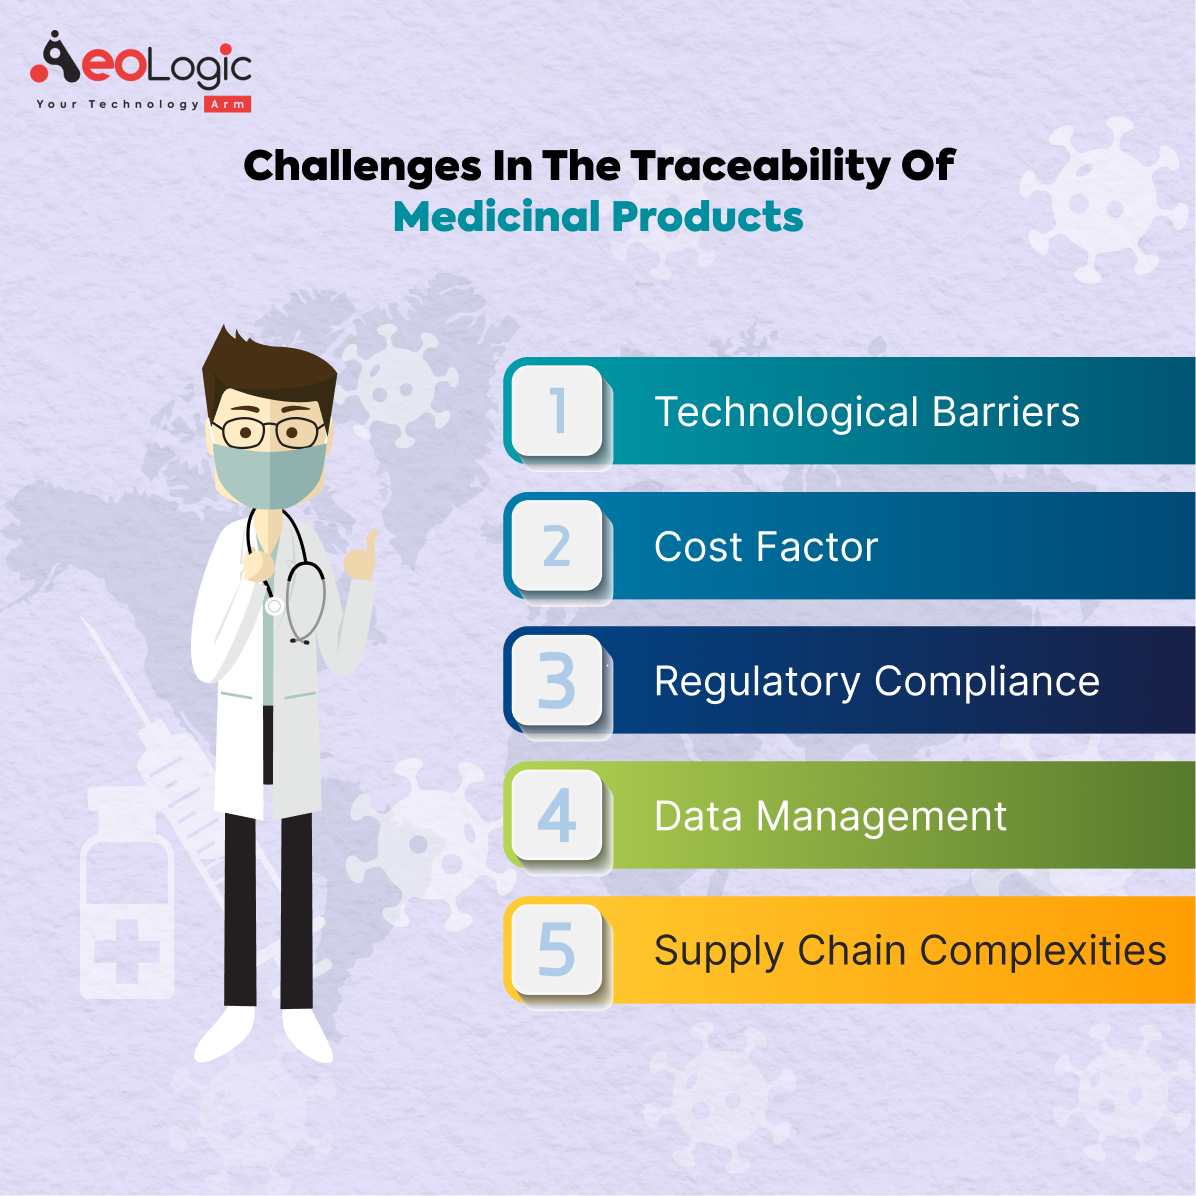 Challenges in the Traceability of Medicinal Products